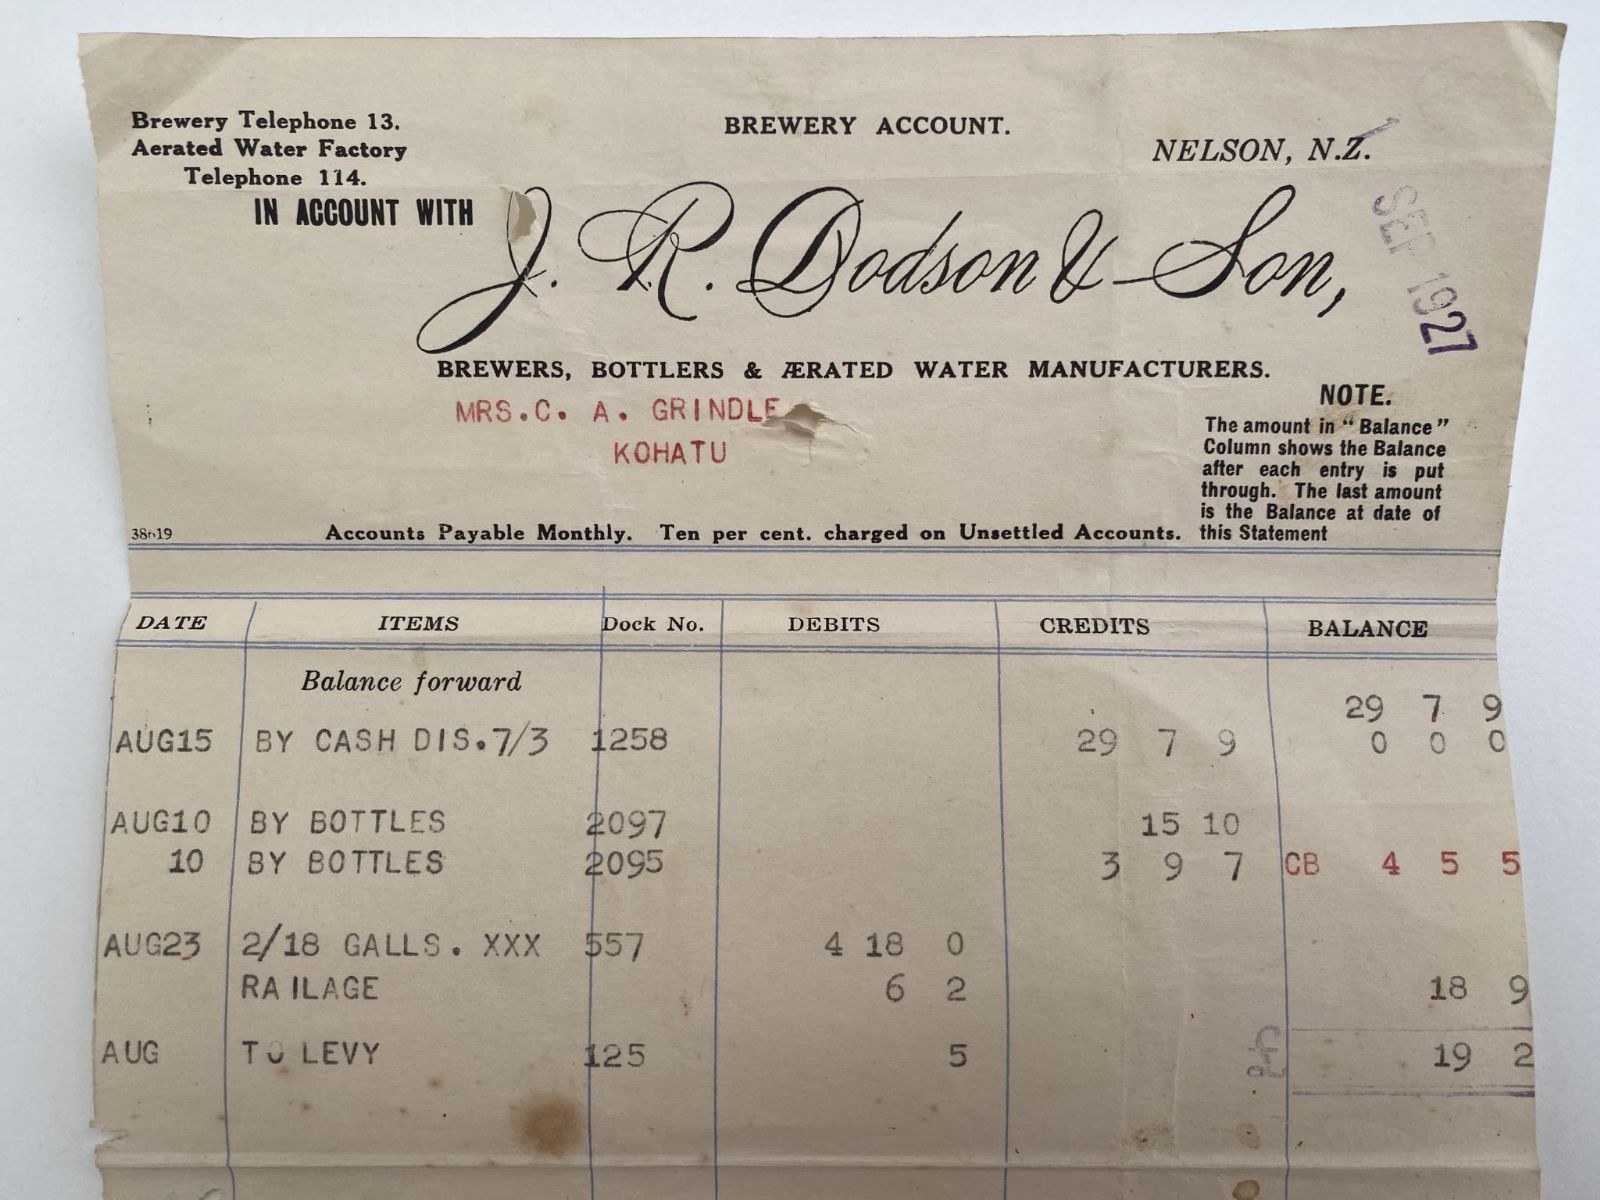 OLD INVOICE / RECEIPT: from J. R Dodson & Son - Brewers & Bottlers, Nelson 1927